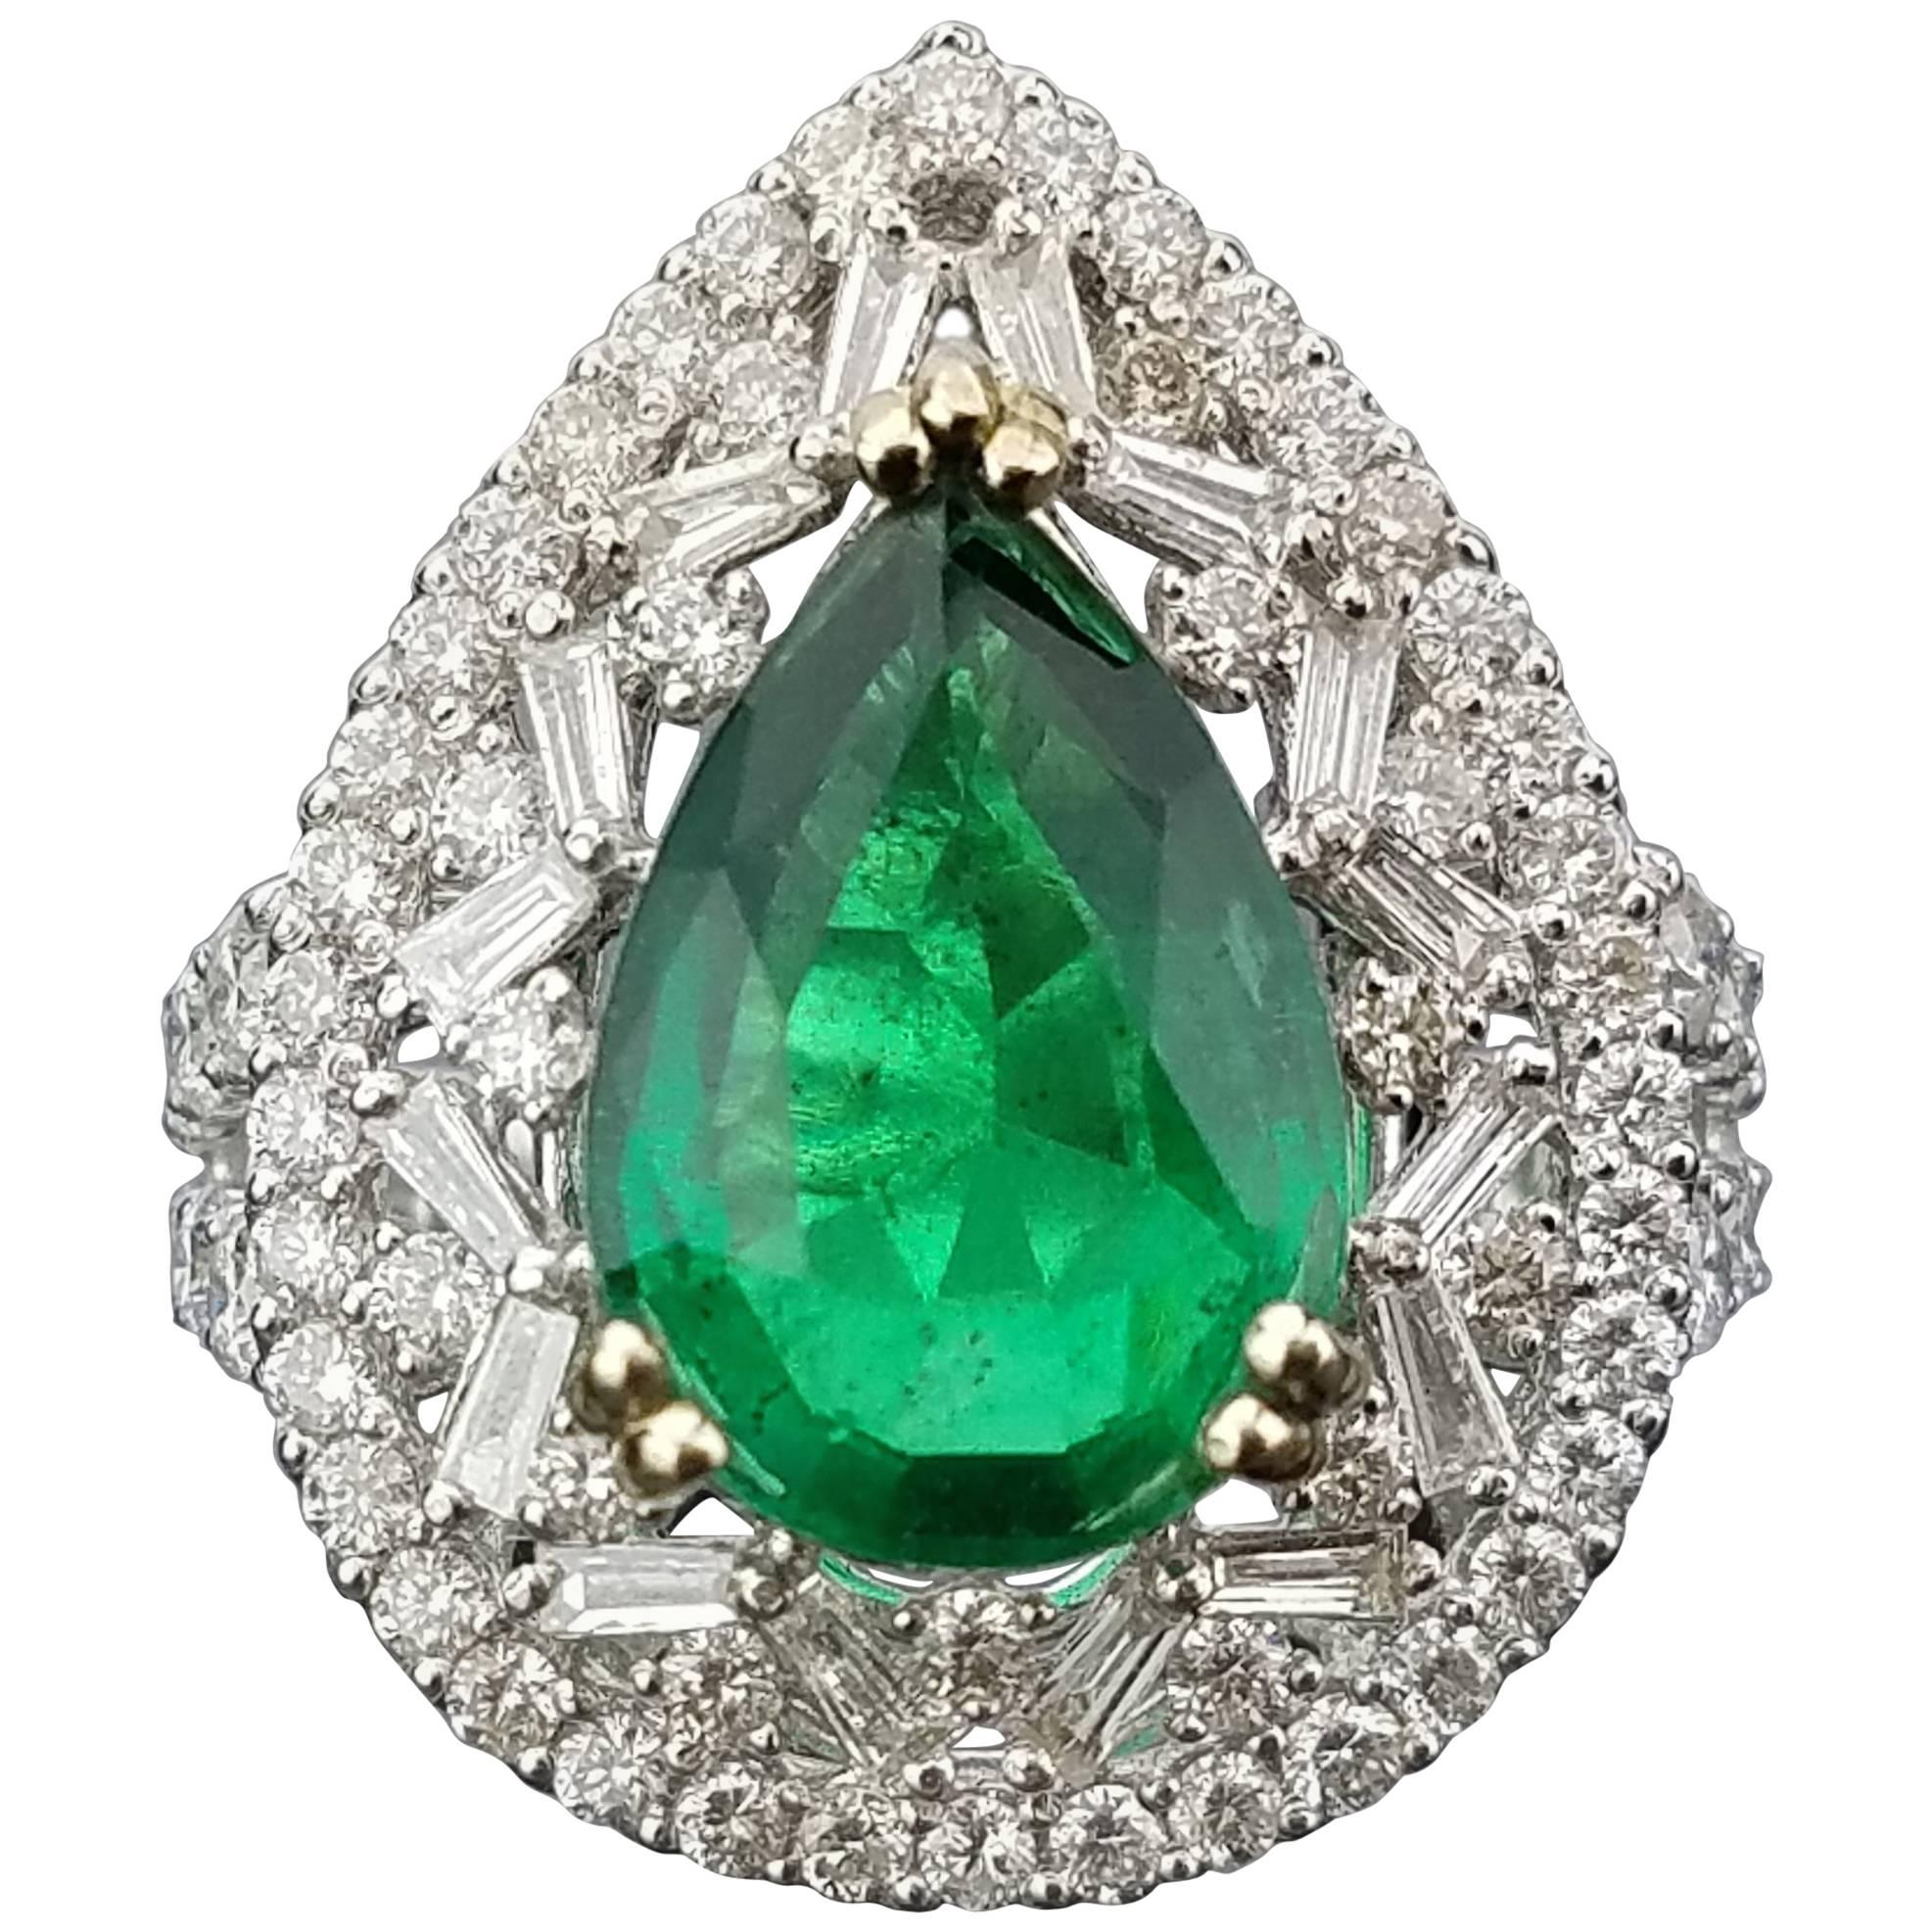 3.52 Carat Pear Shape Emerald and Diamond Cocktail Ring